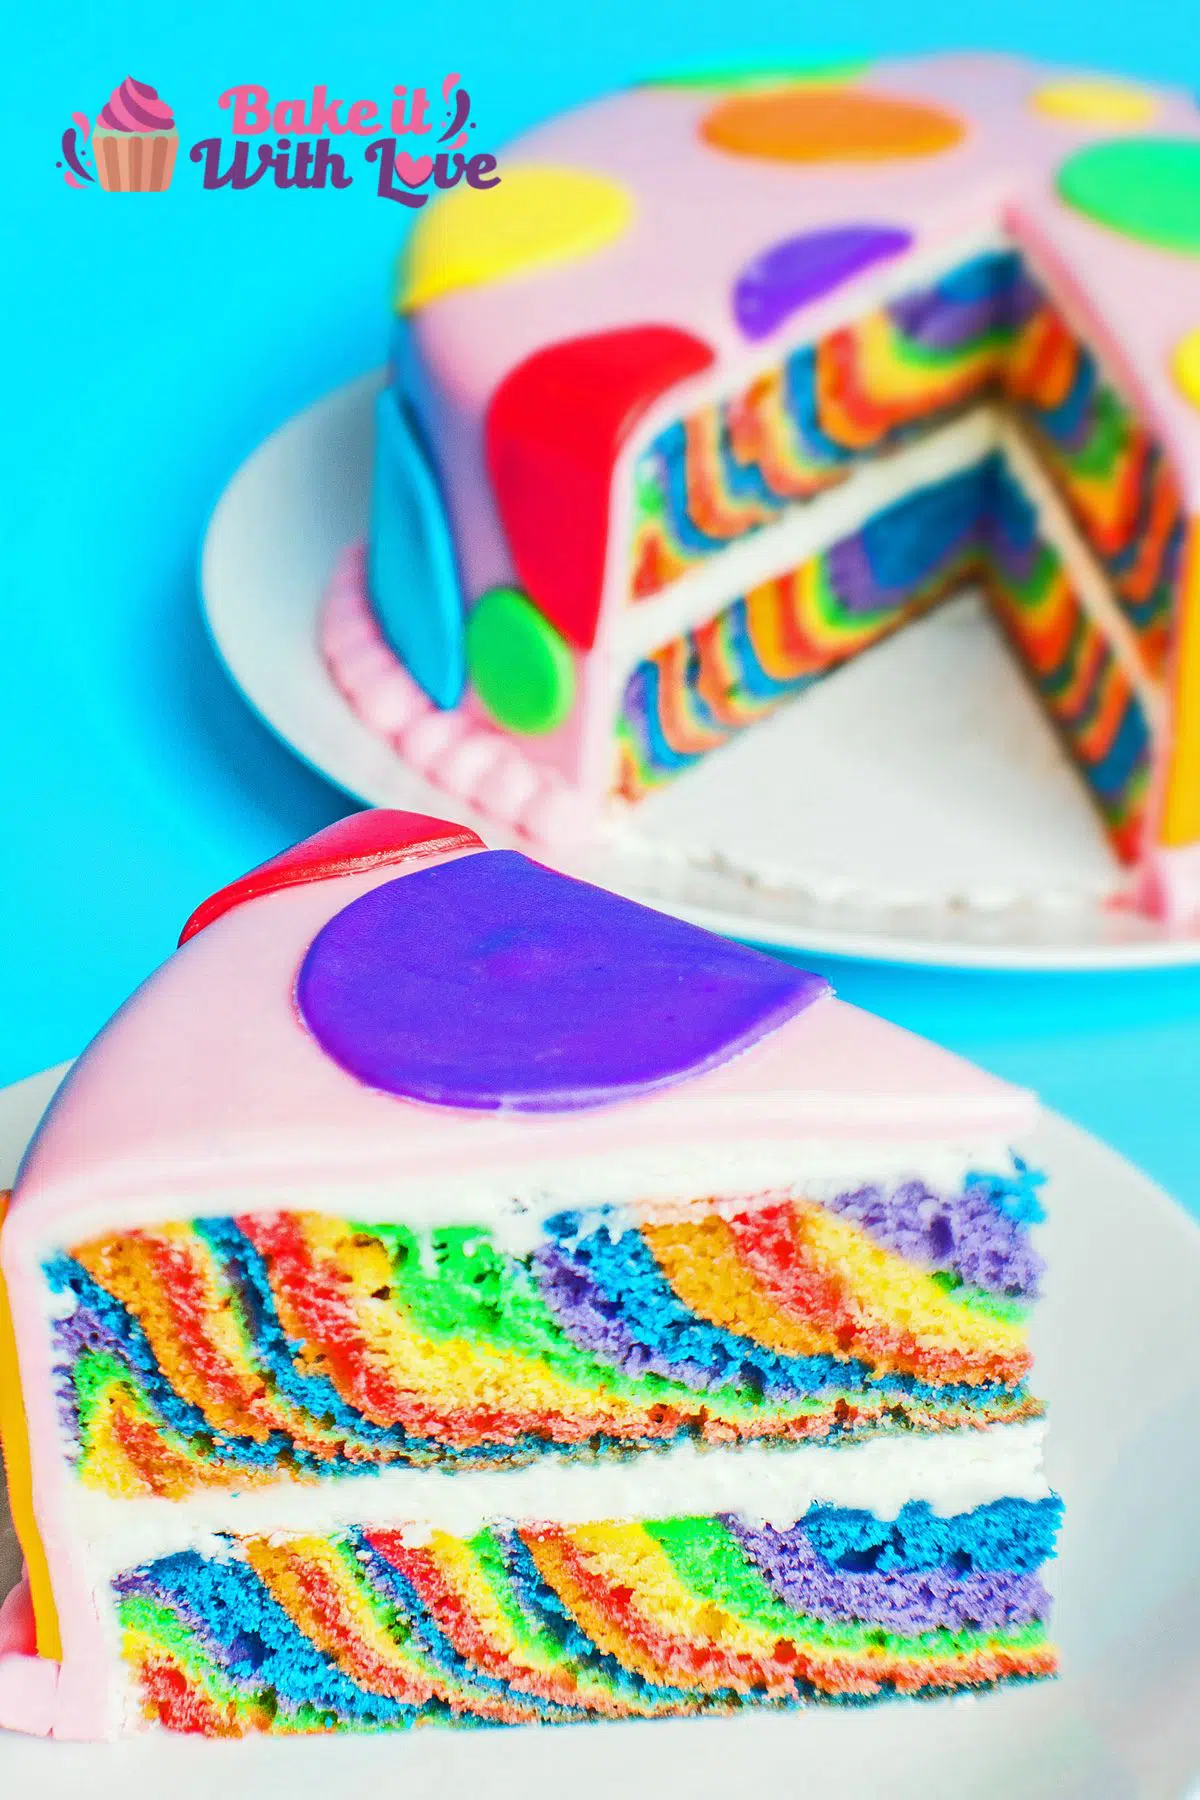 Vertical image of sliced one pan rainbow layer cake with buttercream filling and fondant layer.